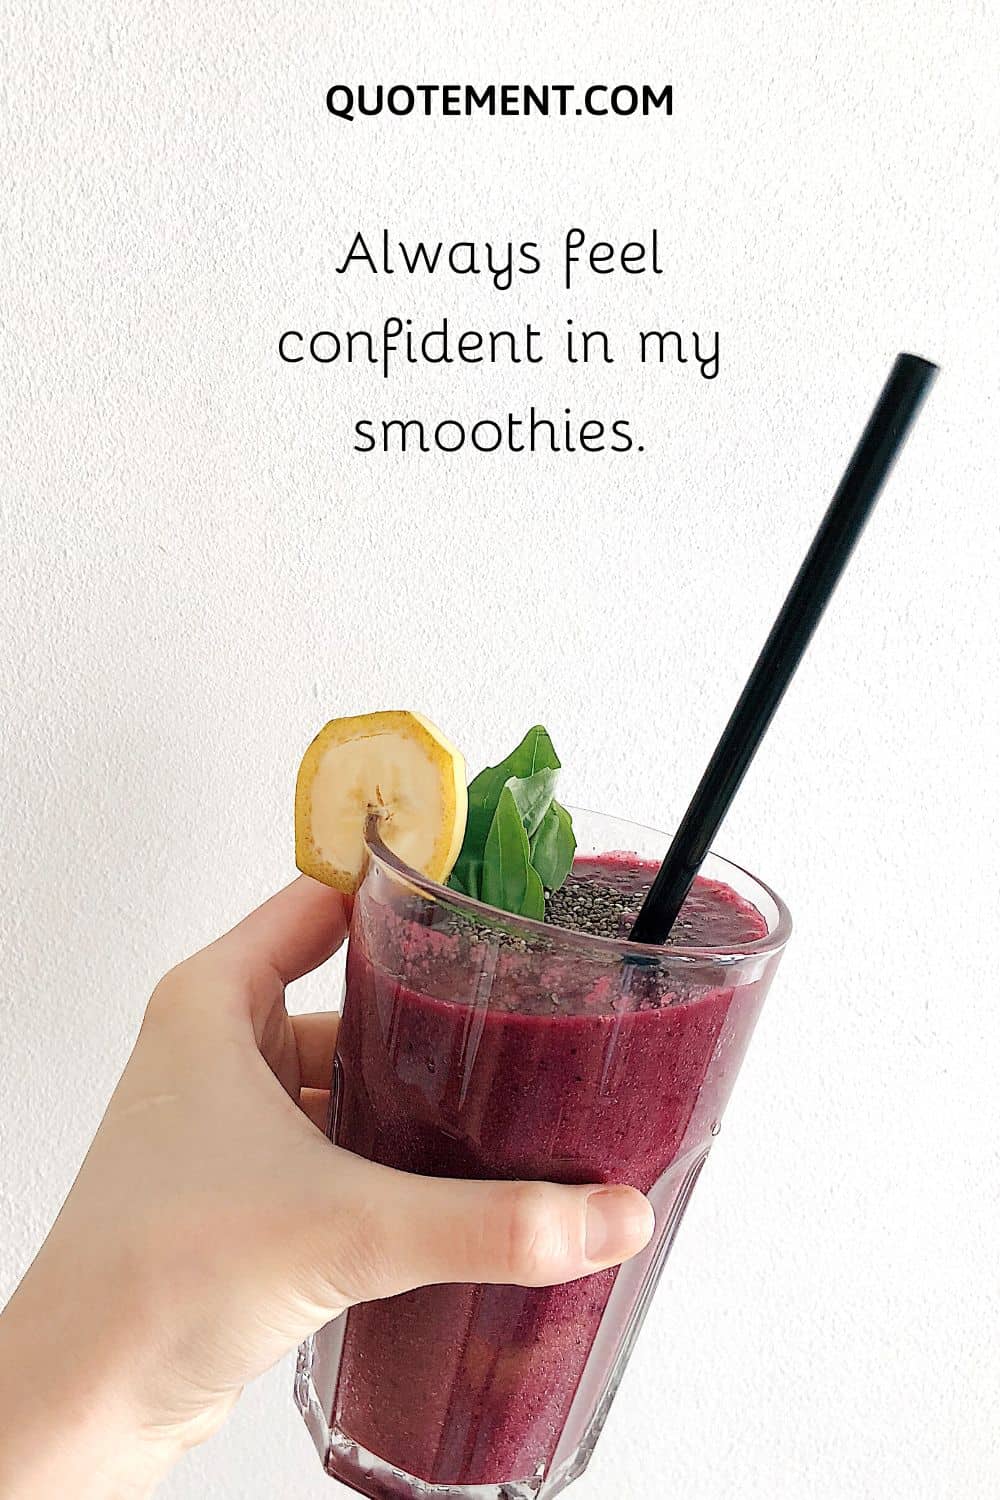 Always feel confident in my smoothies.